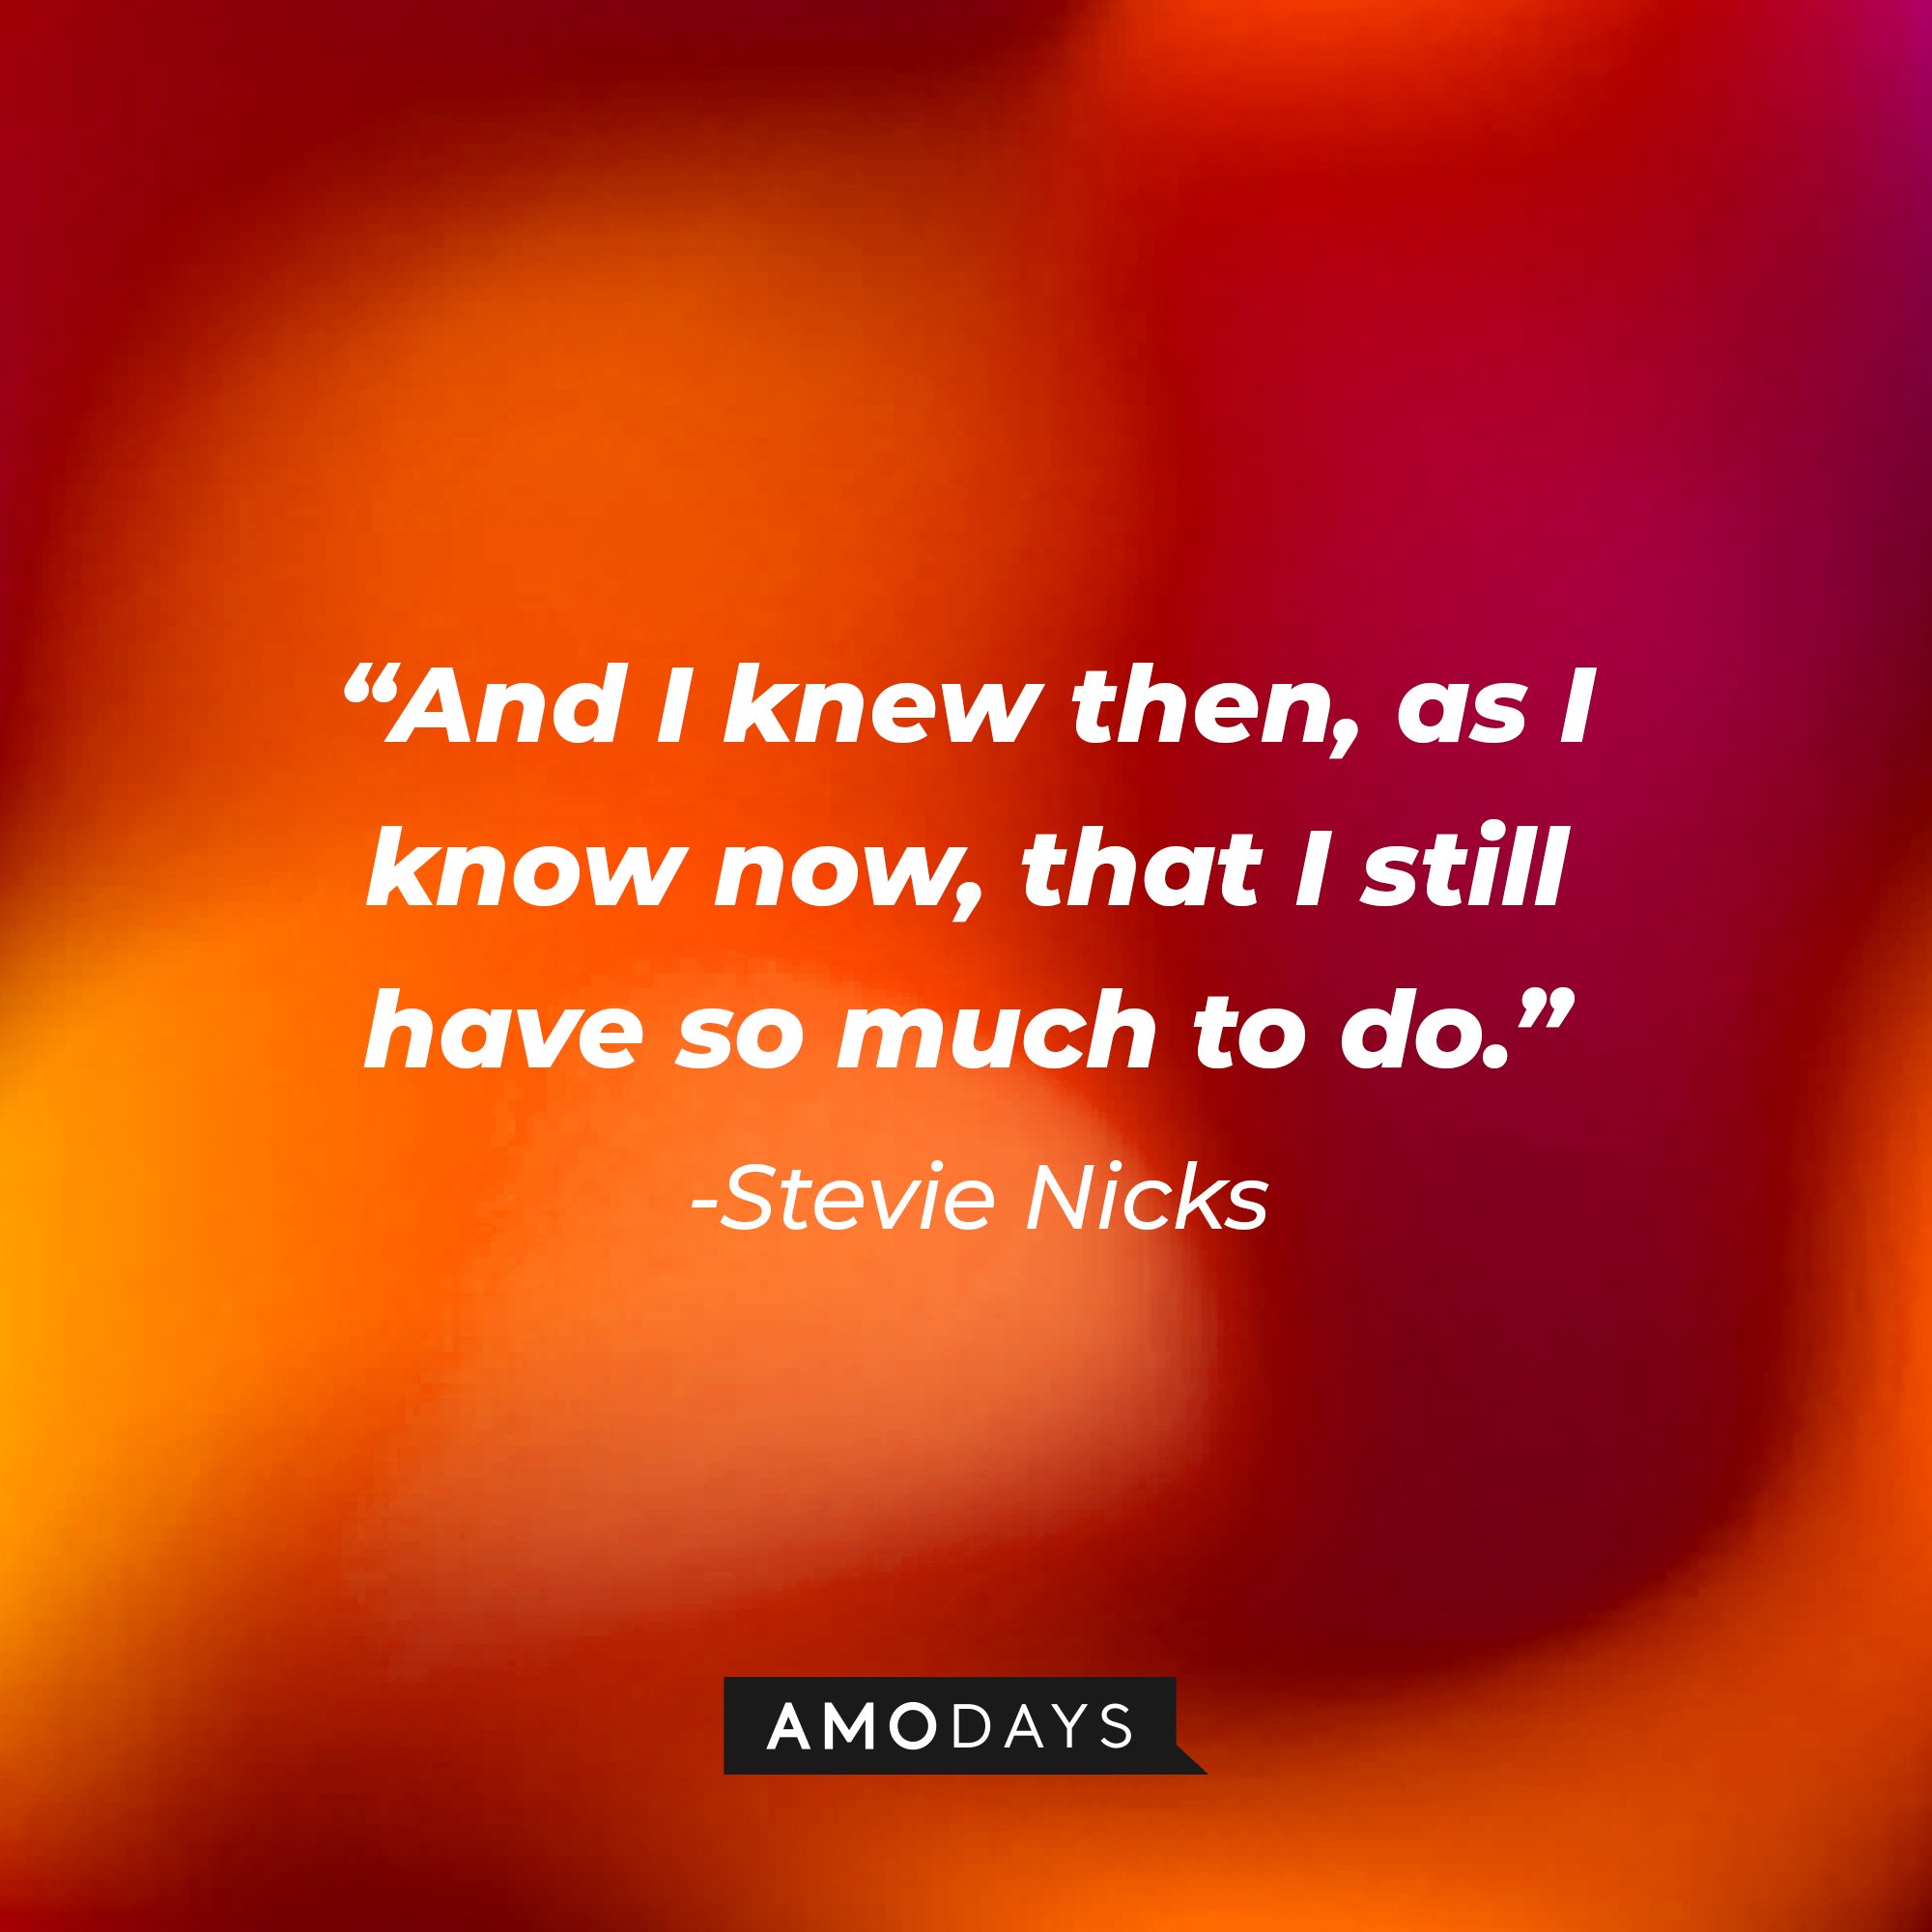 Stevie Nicks's quote: "And I knew then, as I know now, that I still have so much to do." | Image: AmoDays